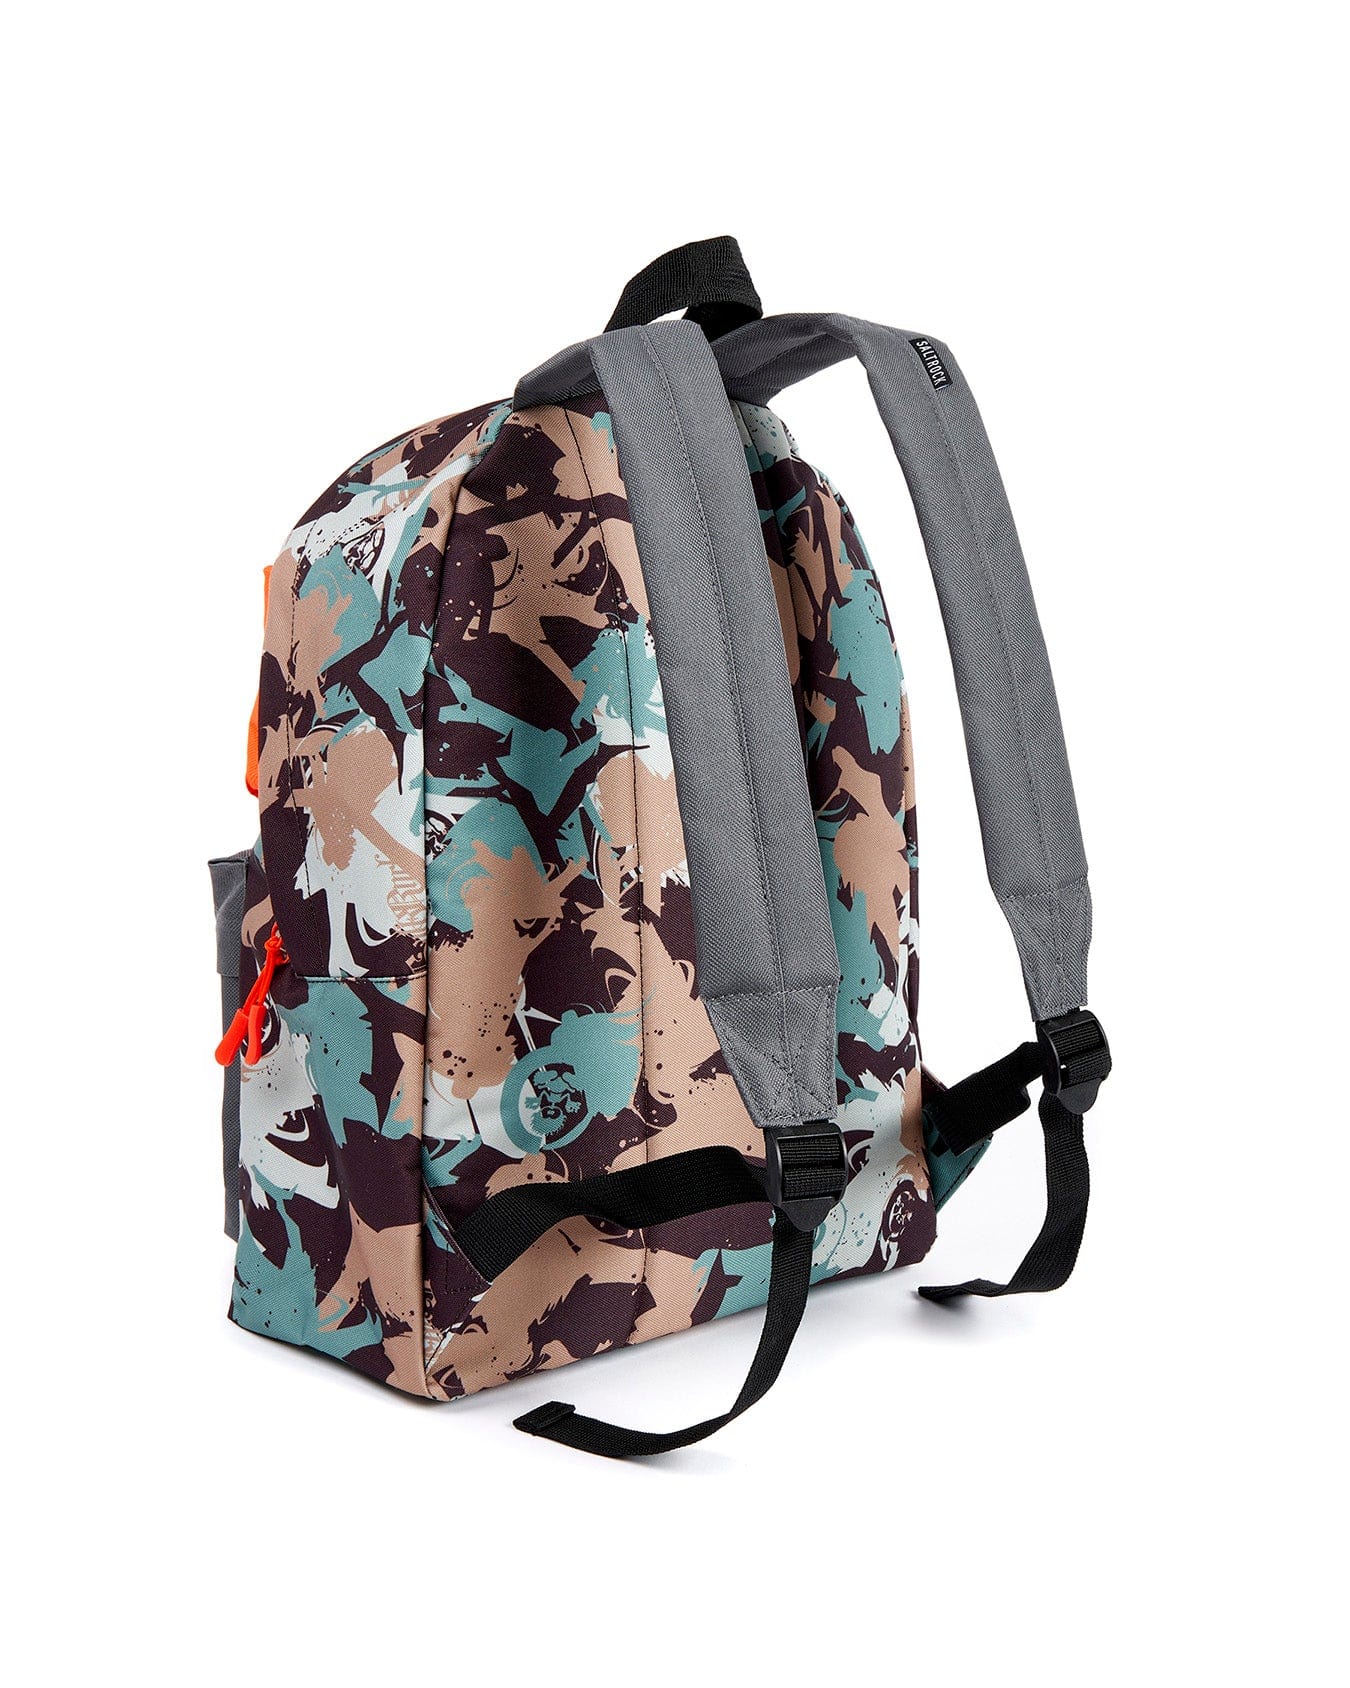 A Saltrock Uni-Camo - Backpack - Grey with a camouflage pattern on it.